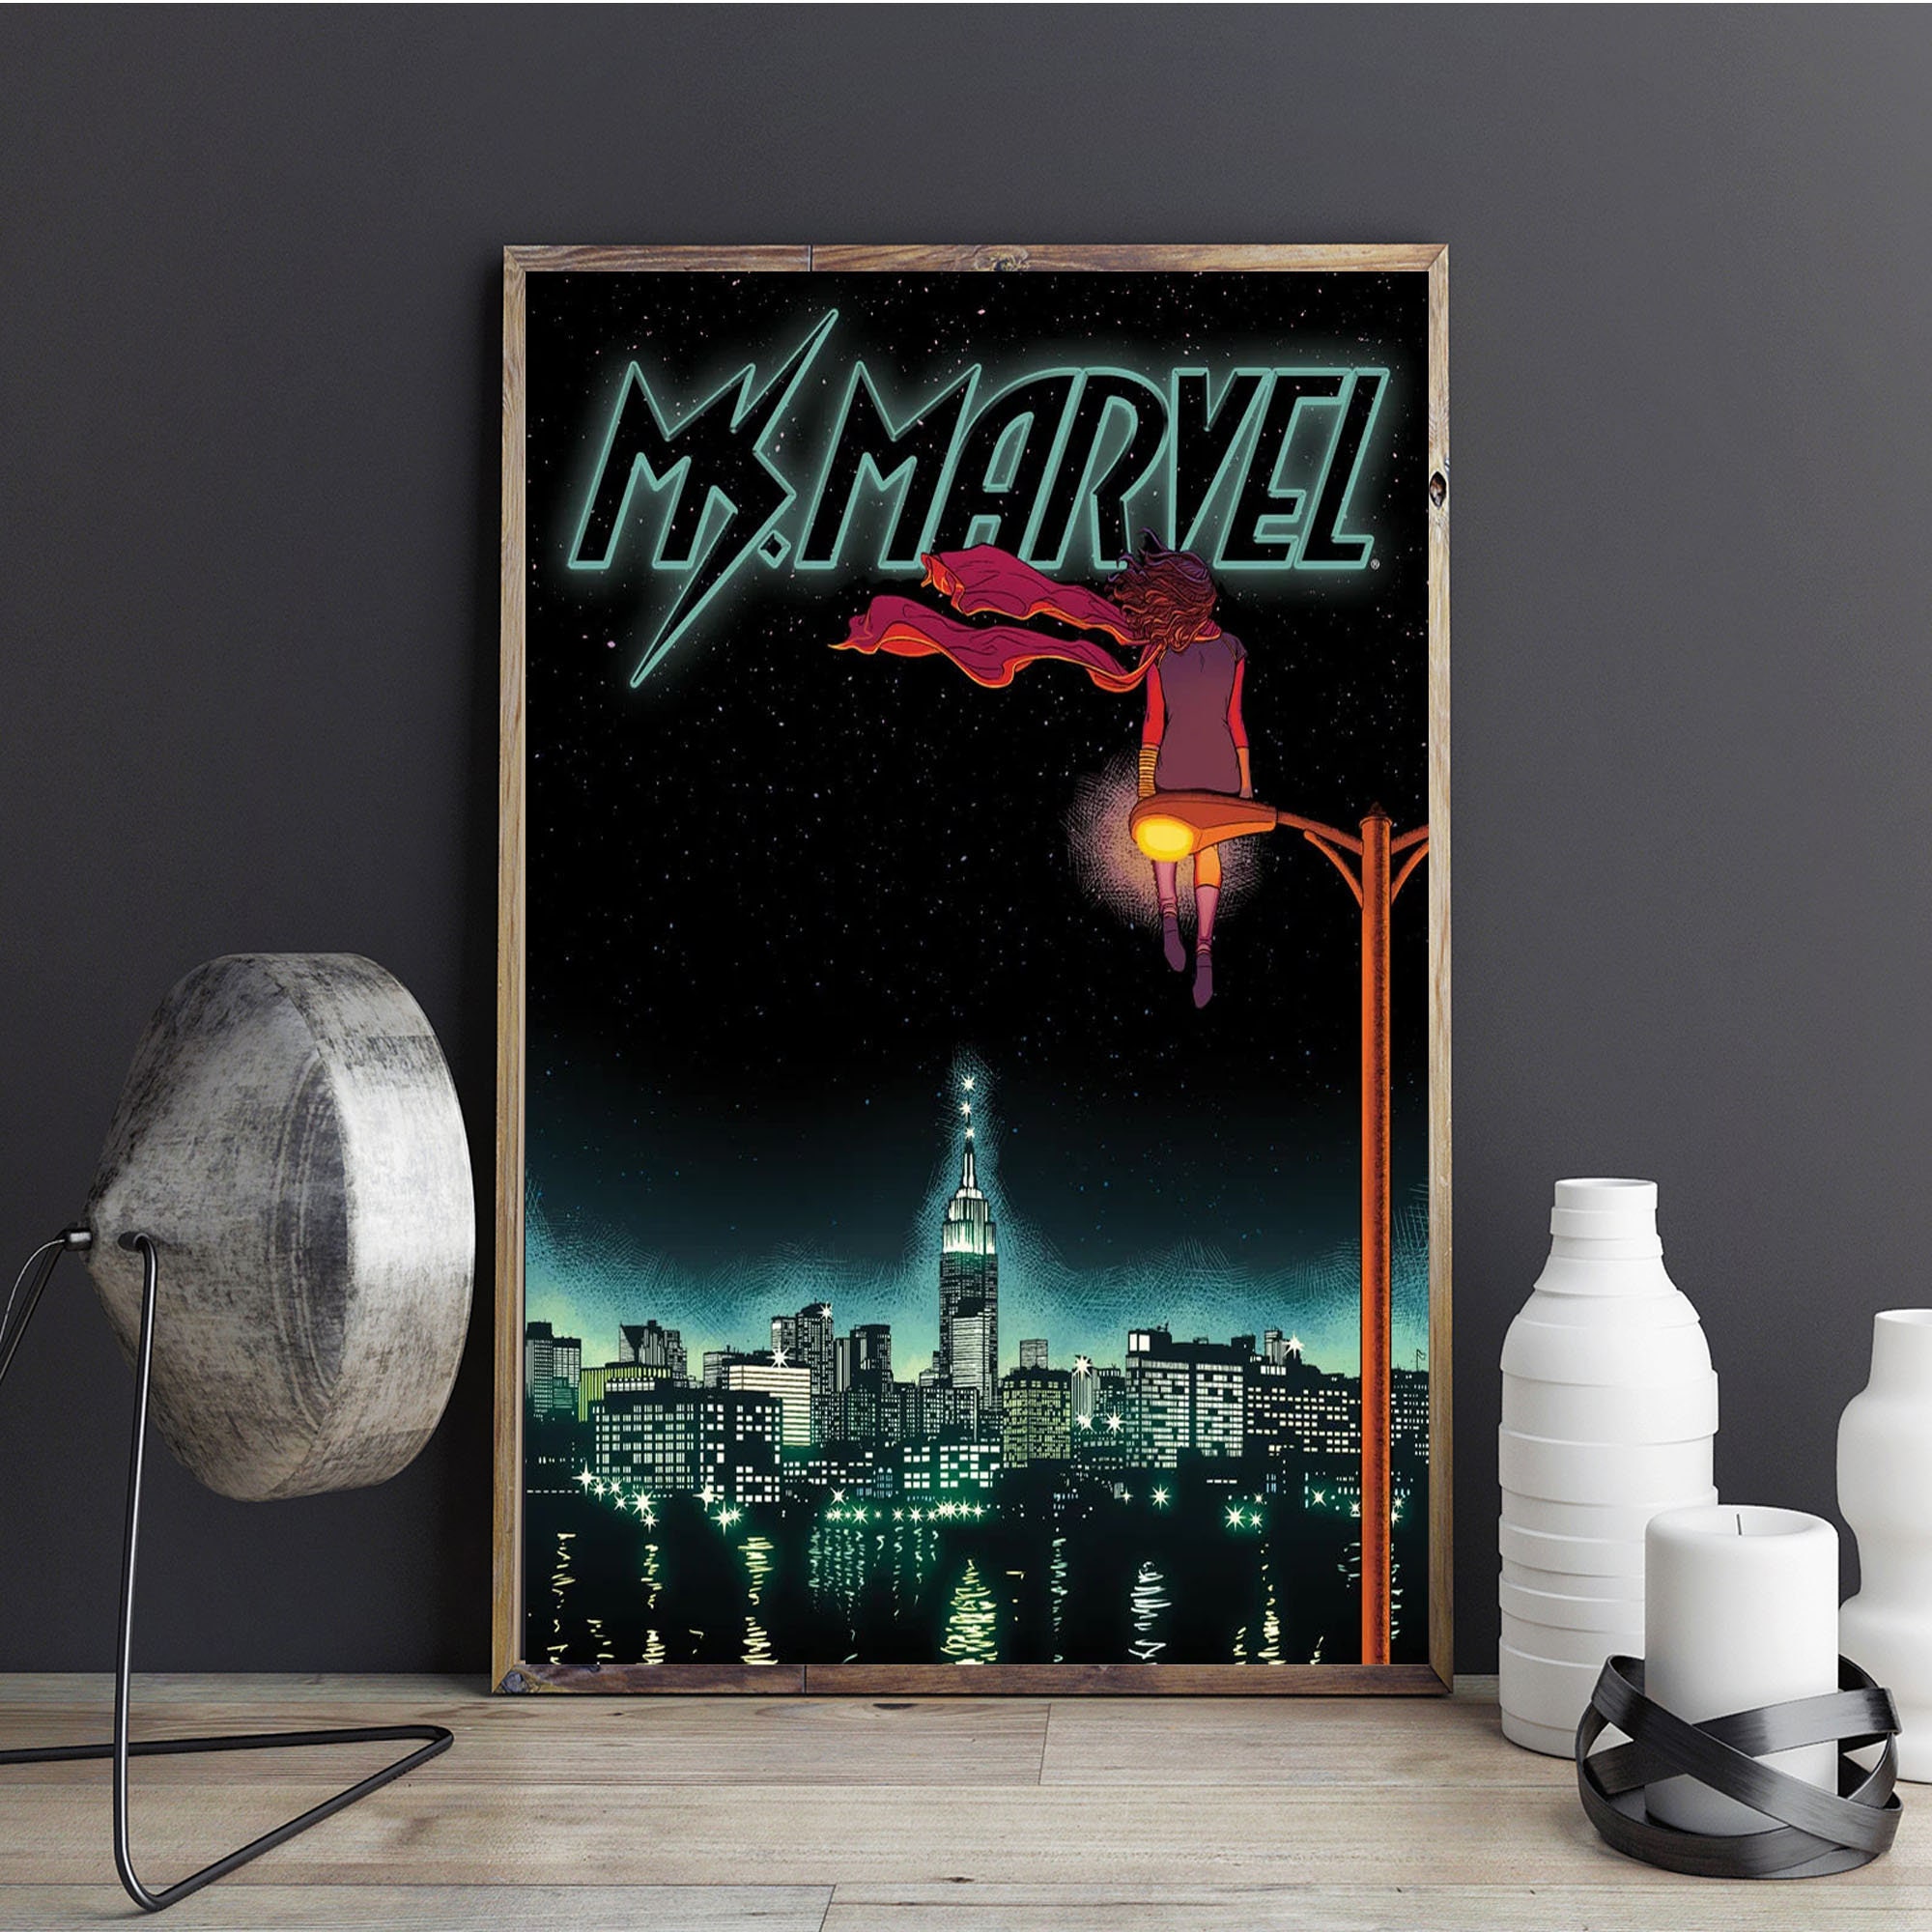 Ms Marvel TV Show Movie Poster